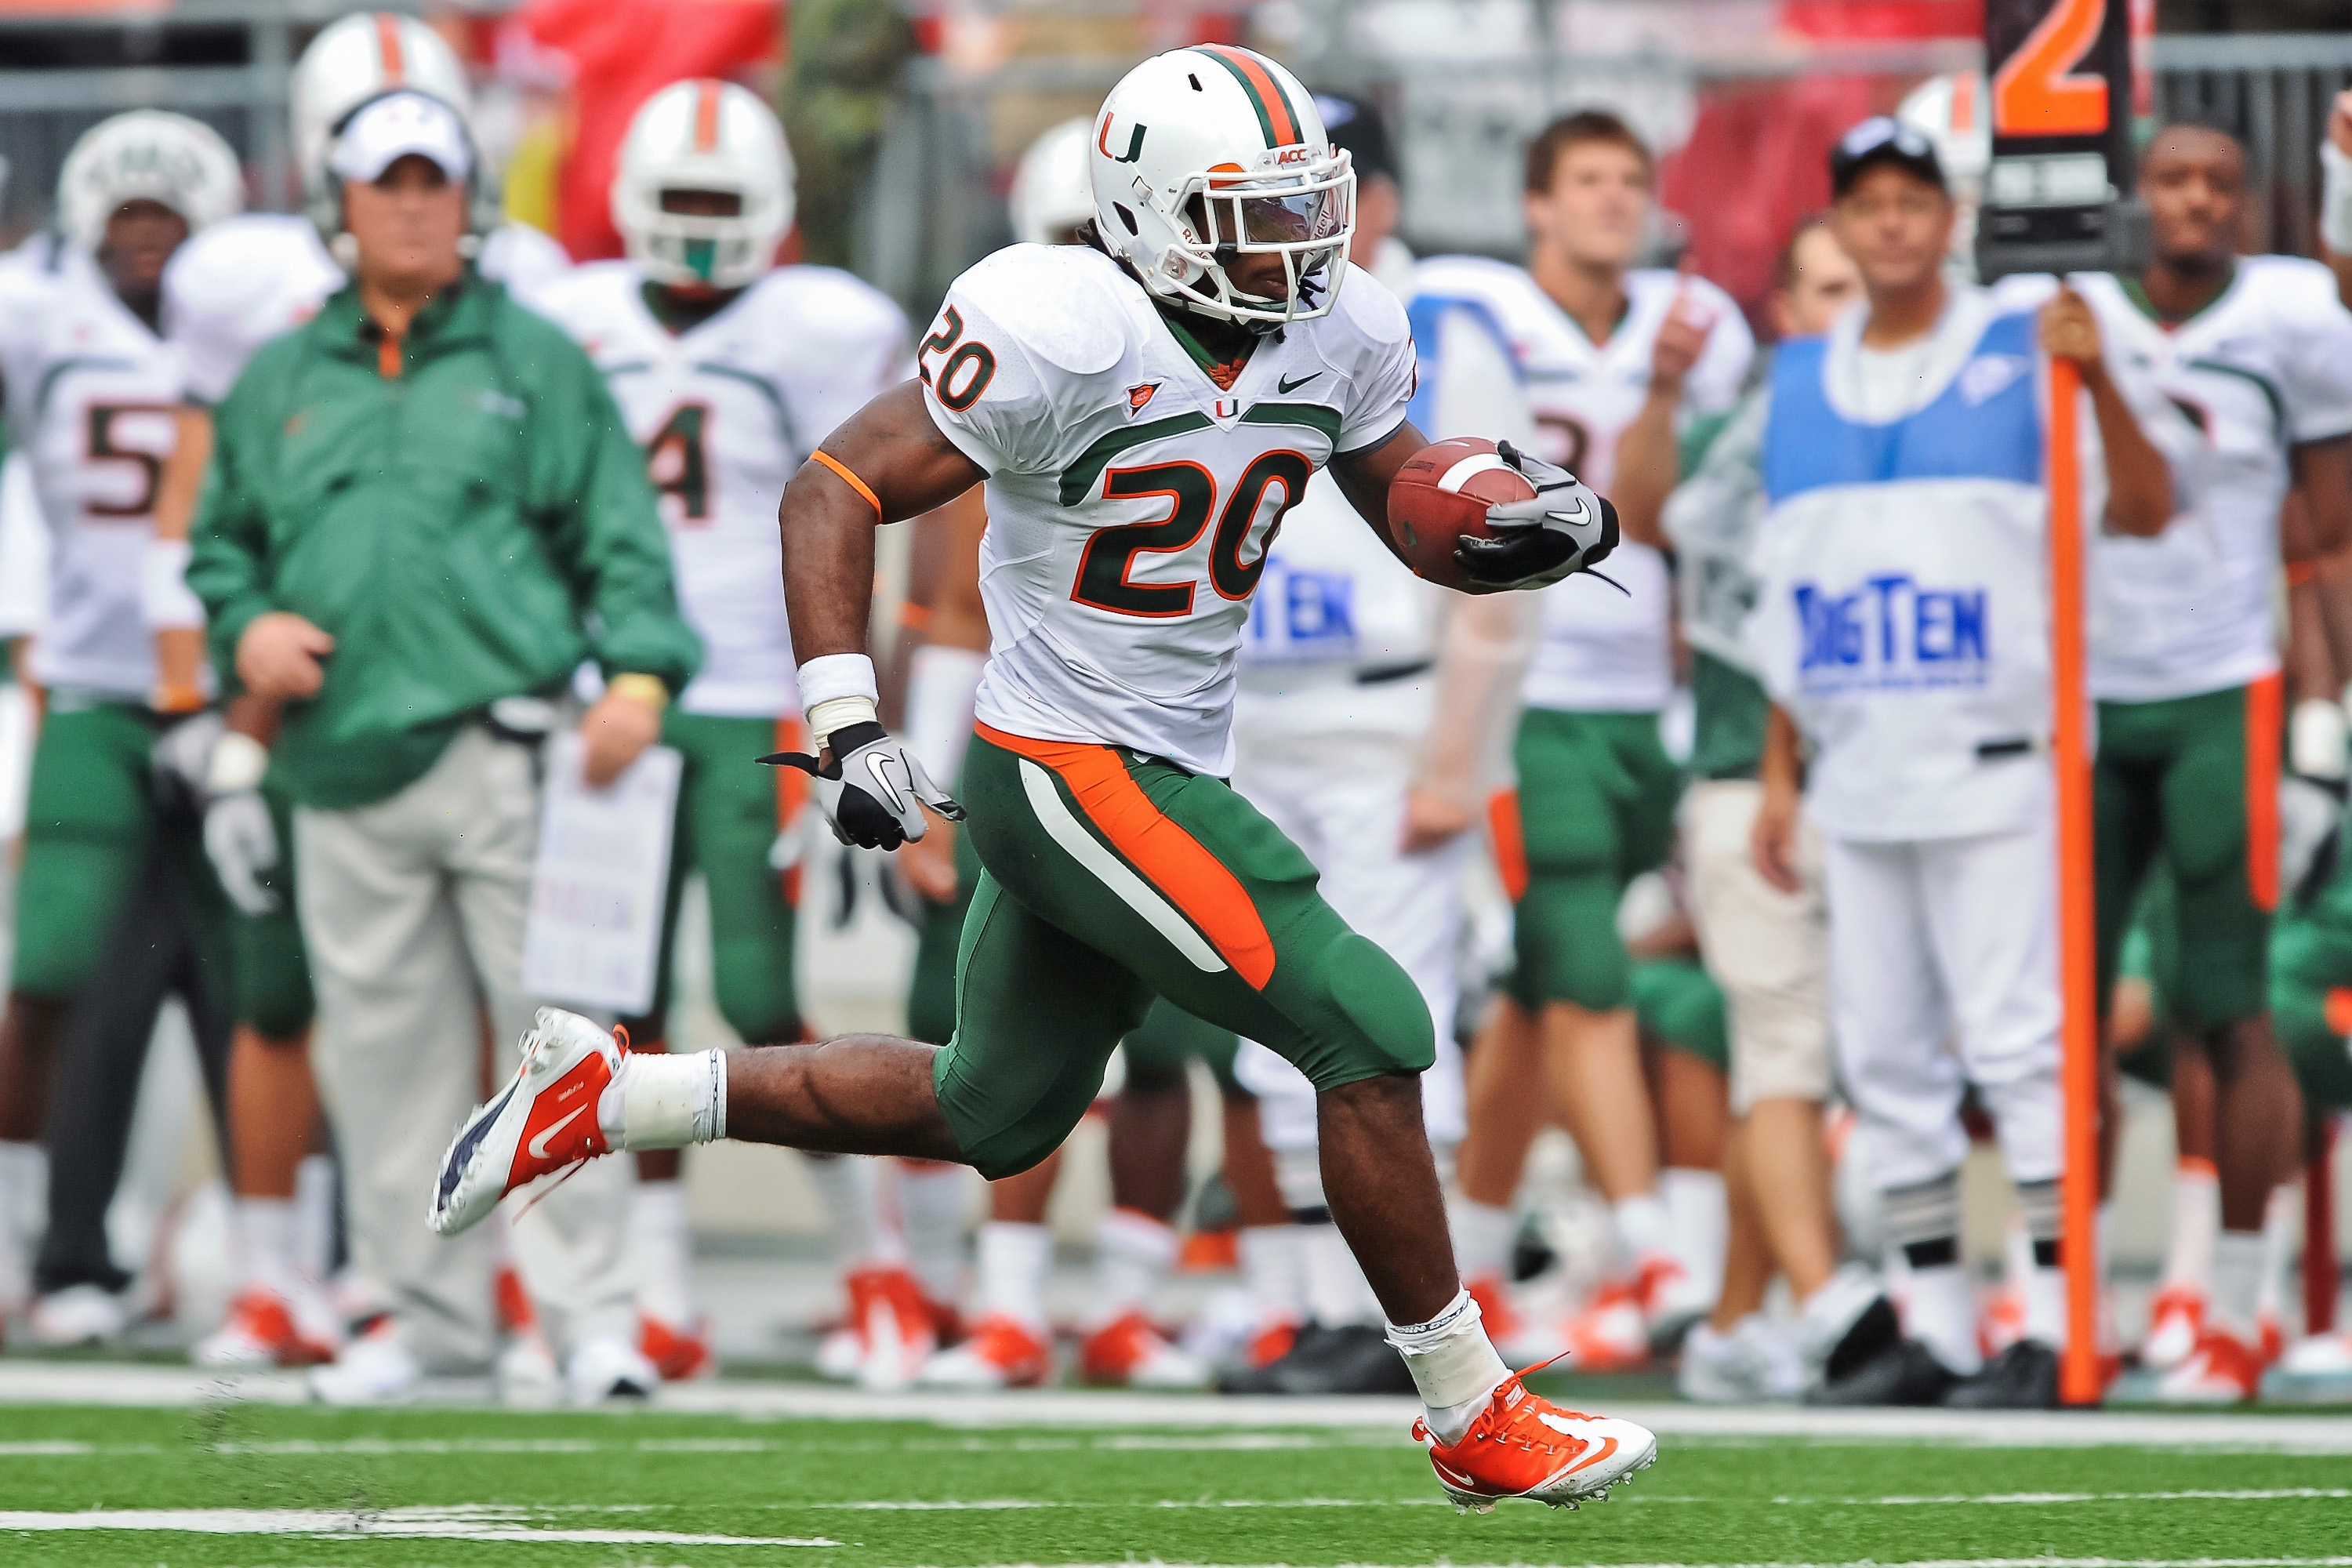 COLUMBUS, OH - SEPTEMBER 11:  Damien Berry #20 of the Miami Hurricanes runs with the ball against the Ohio State Buckeyes at Ohio Stadium on September 11, 2010 in Columbus, Ohio.  (Photo by Jamie Sabau/Getty Images)